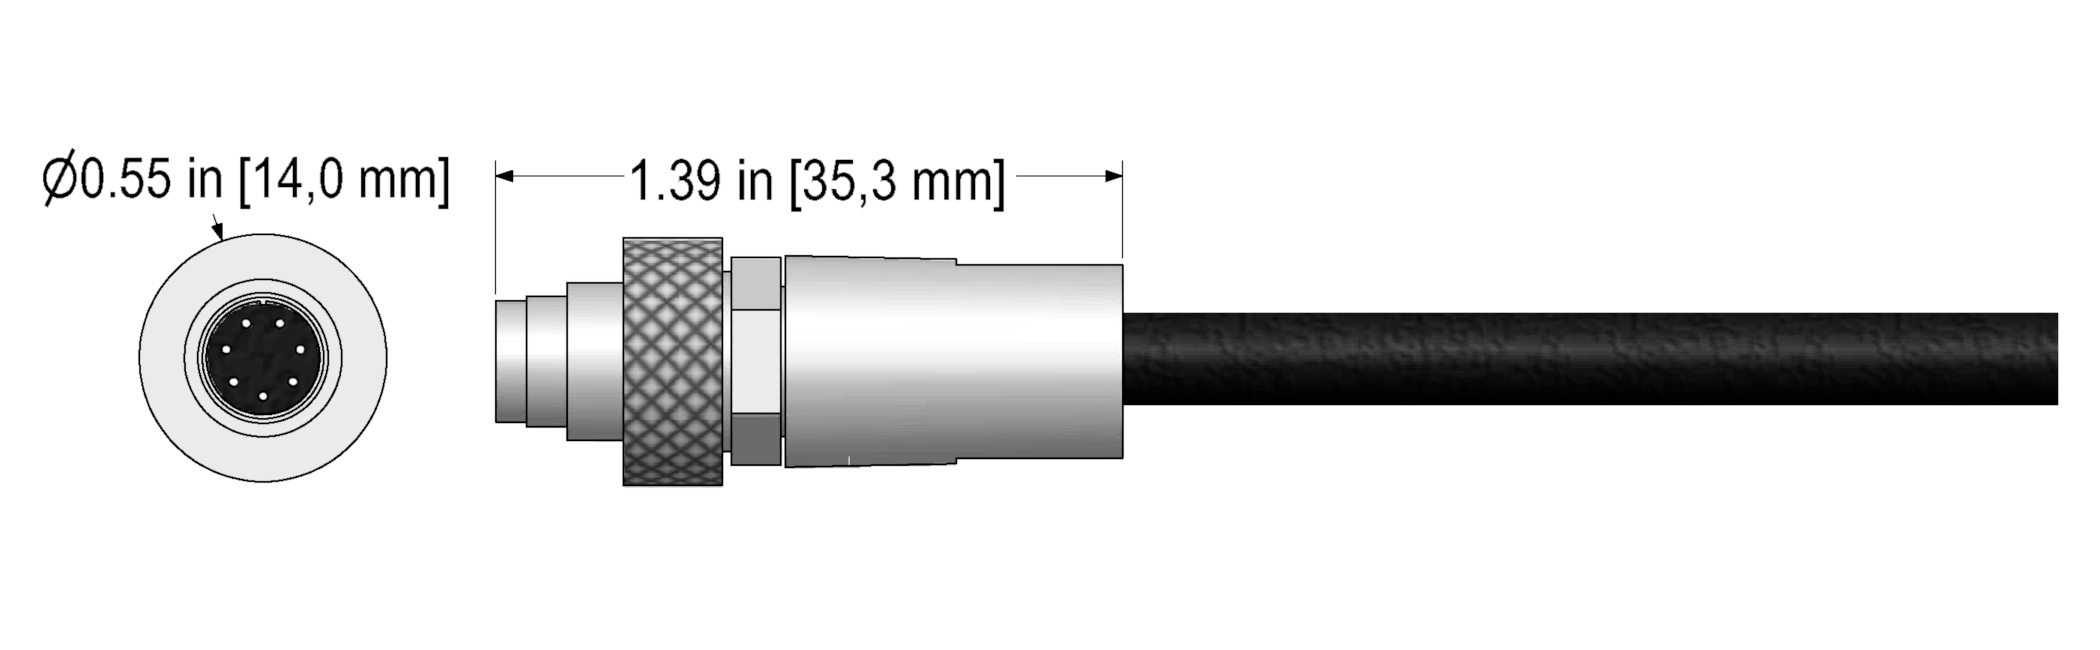 A line drawing showing the diameter and length of an assembled CTC C539 vibration sensor connector kit.